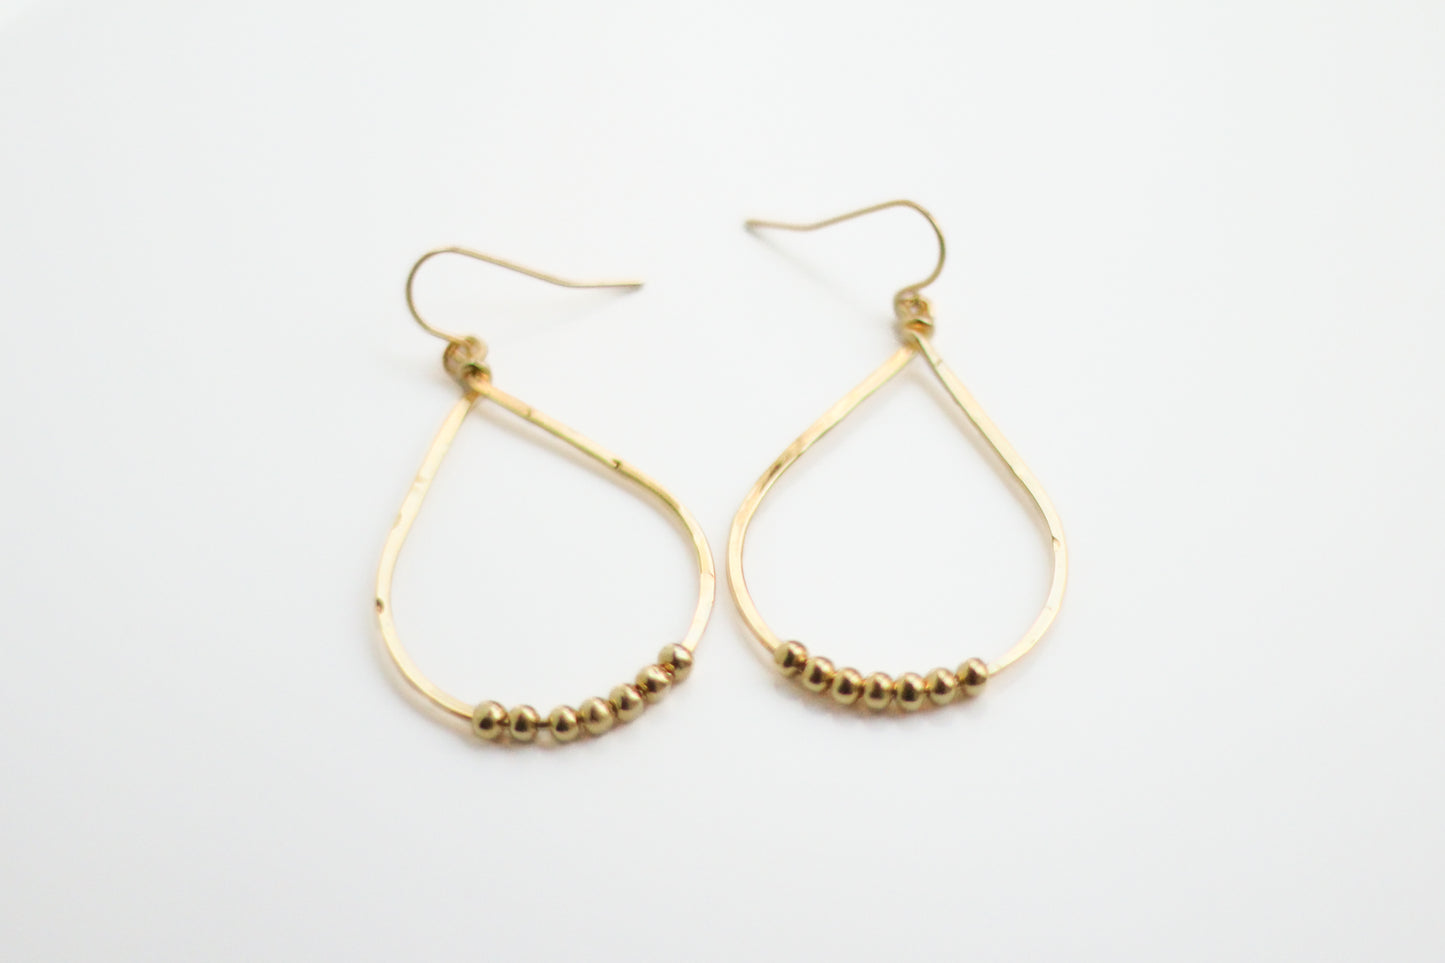 Hammered Teardrop Beads Earrings. 14K Gold plated.